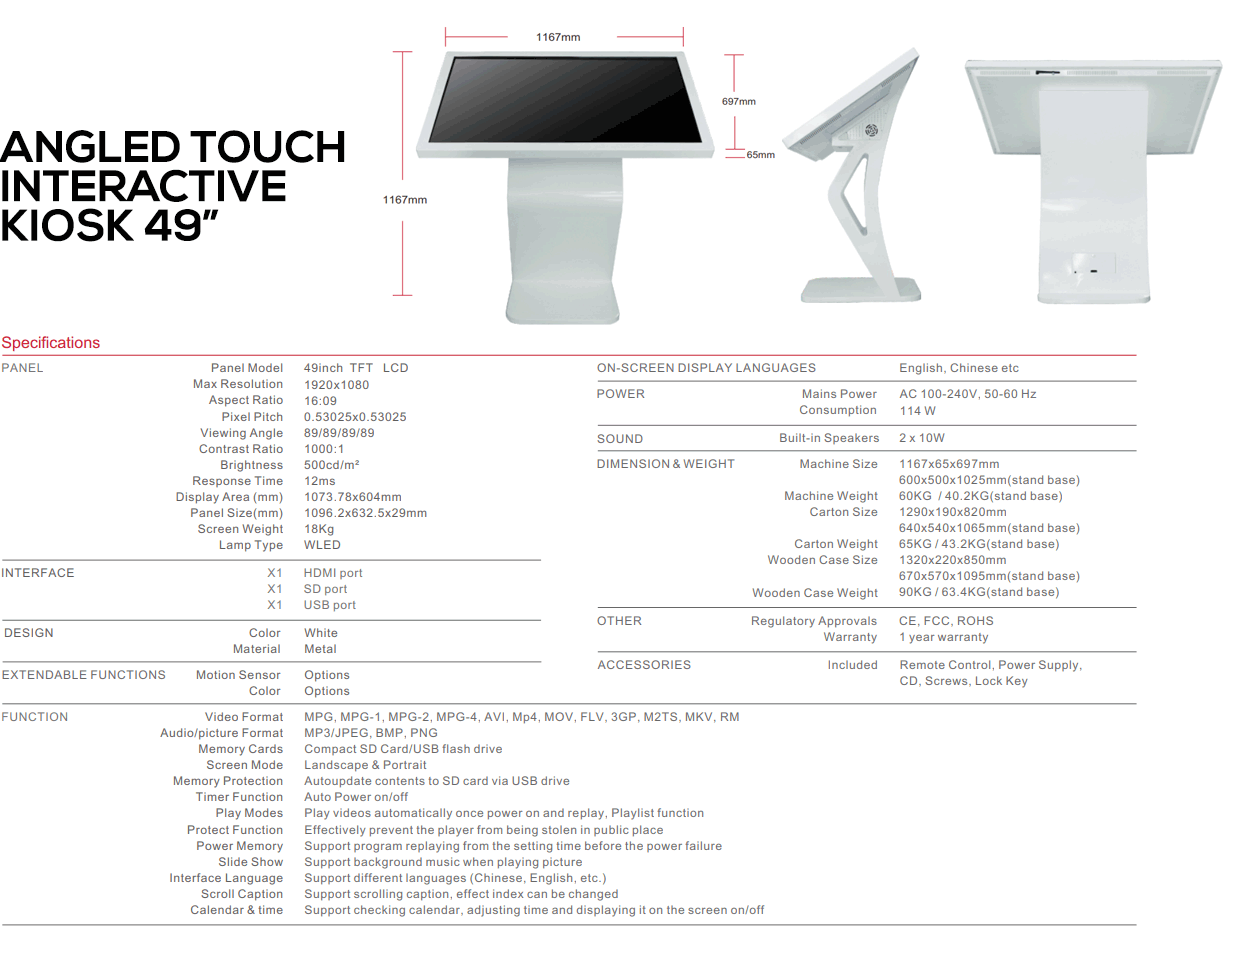 Angled Touch Interactive Kiosk - 49 inch